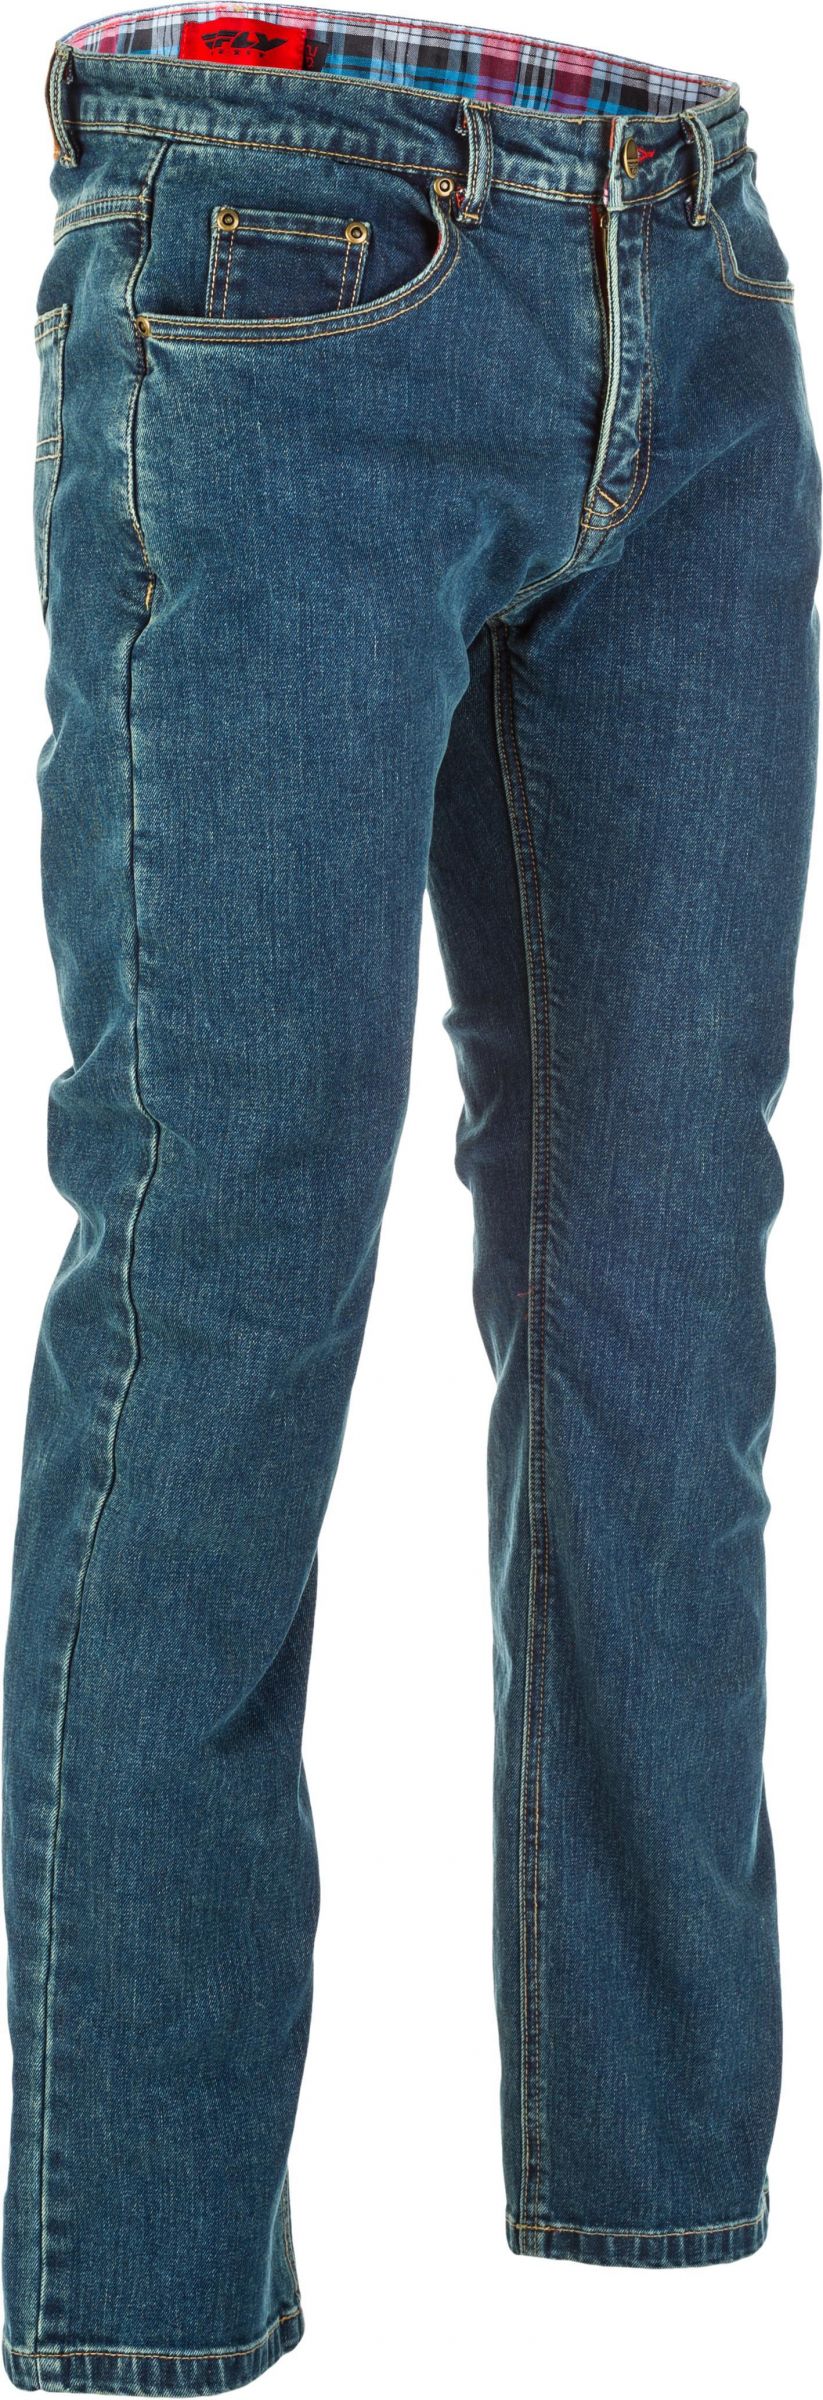 8RQO-FLY-RA-6049-478-30432 Resistance Jeans